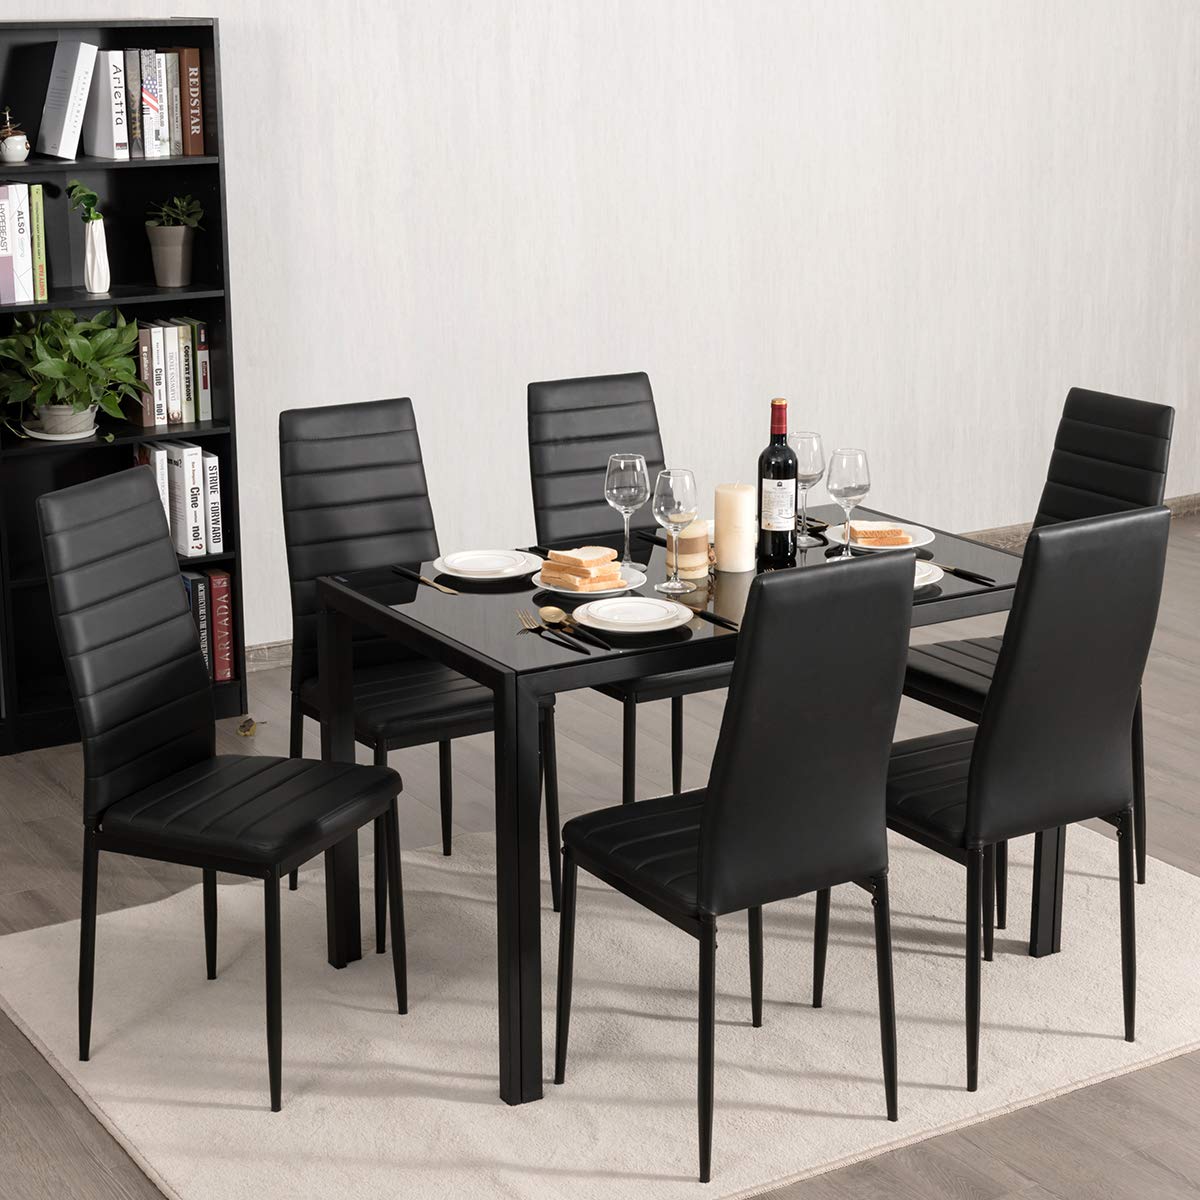 Giantex Set of 6 Dining Chairs